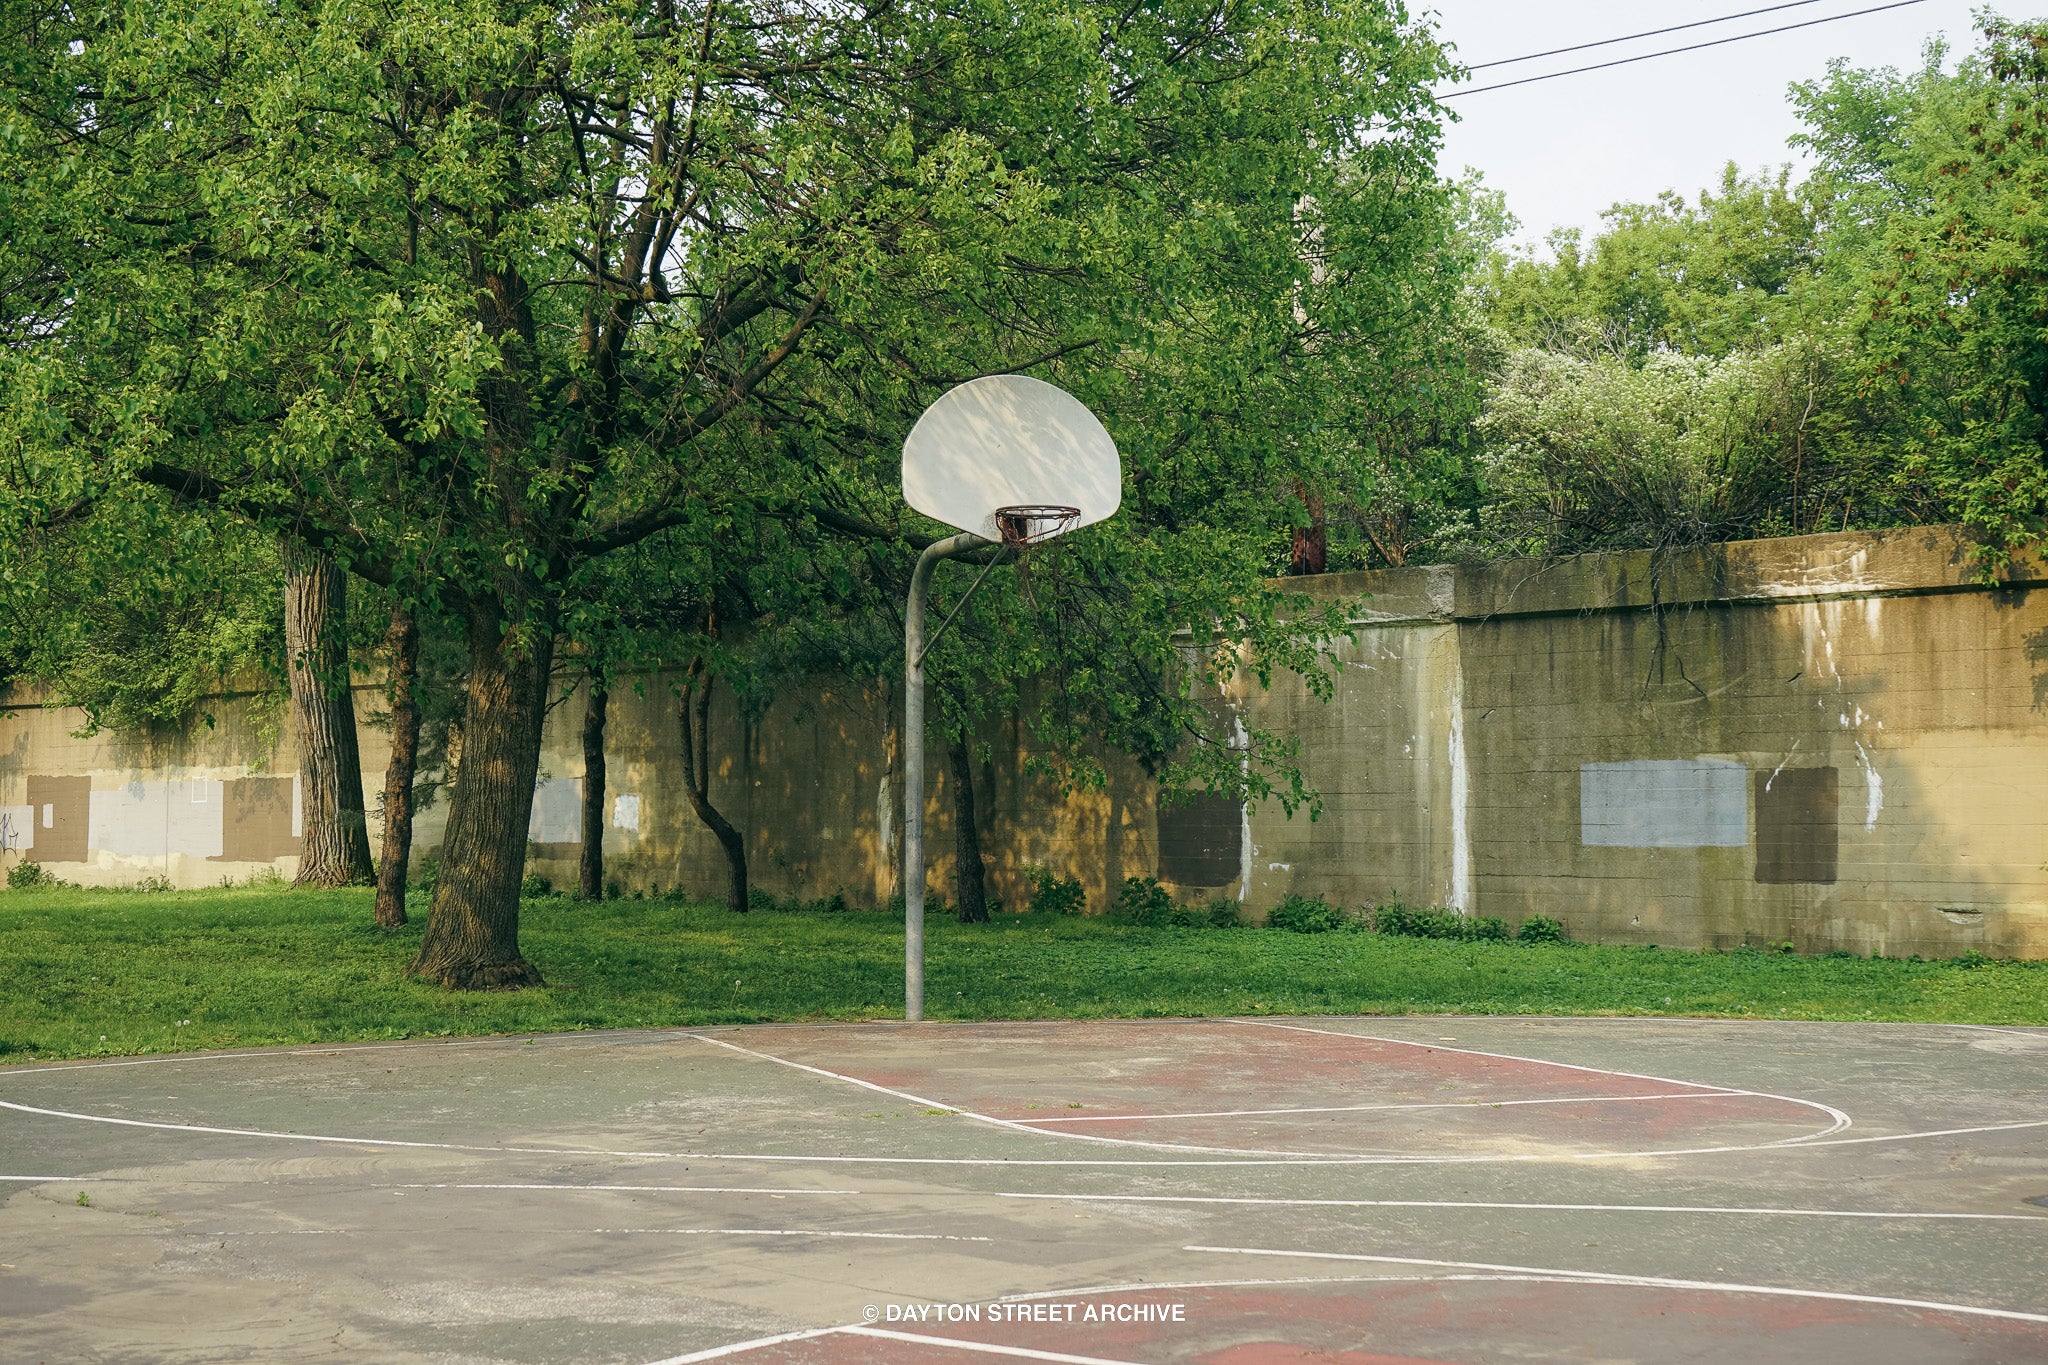 vintage urban basketball court photograph with trees and train rails in background